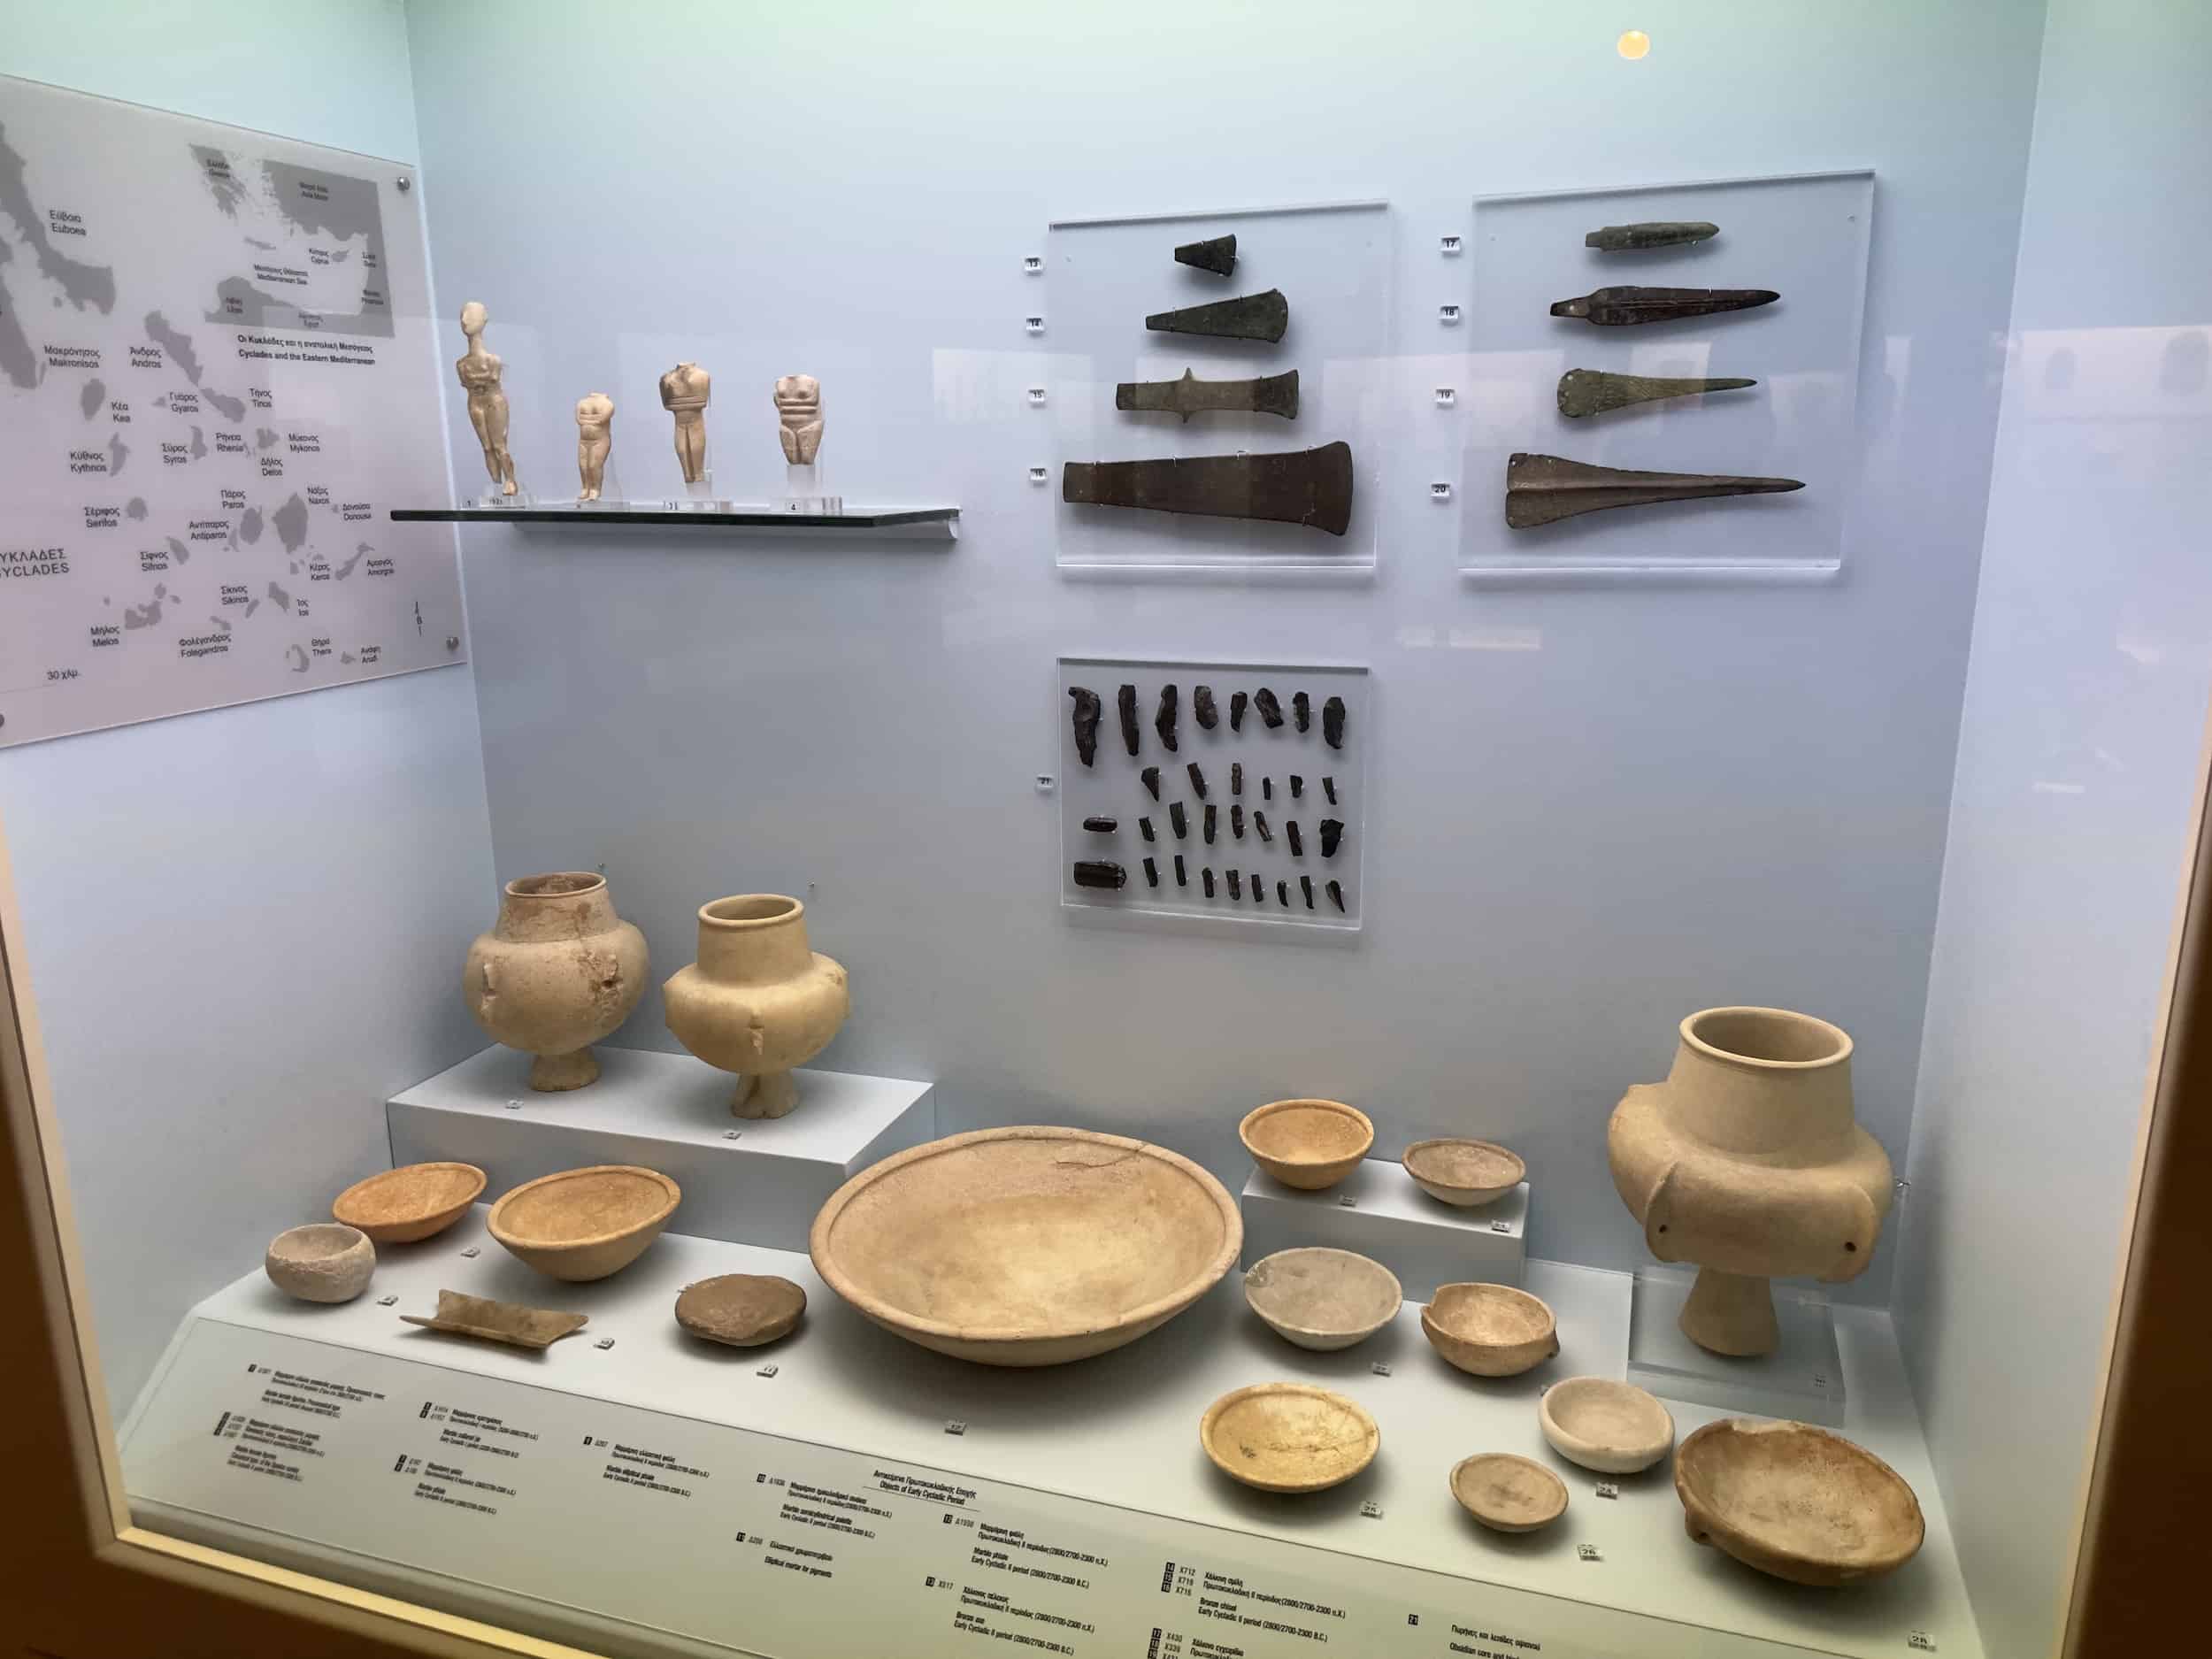 Items of the Early Cycladic period at the Canellopoulos Museum in Athens, Greece